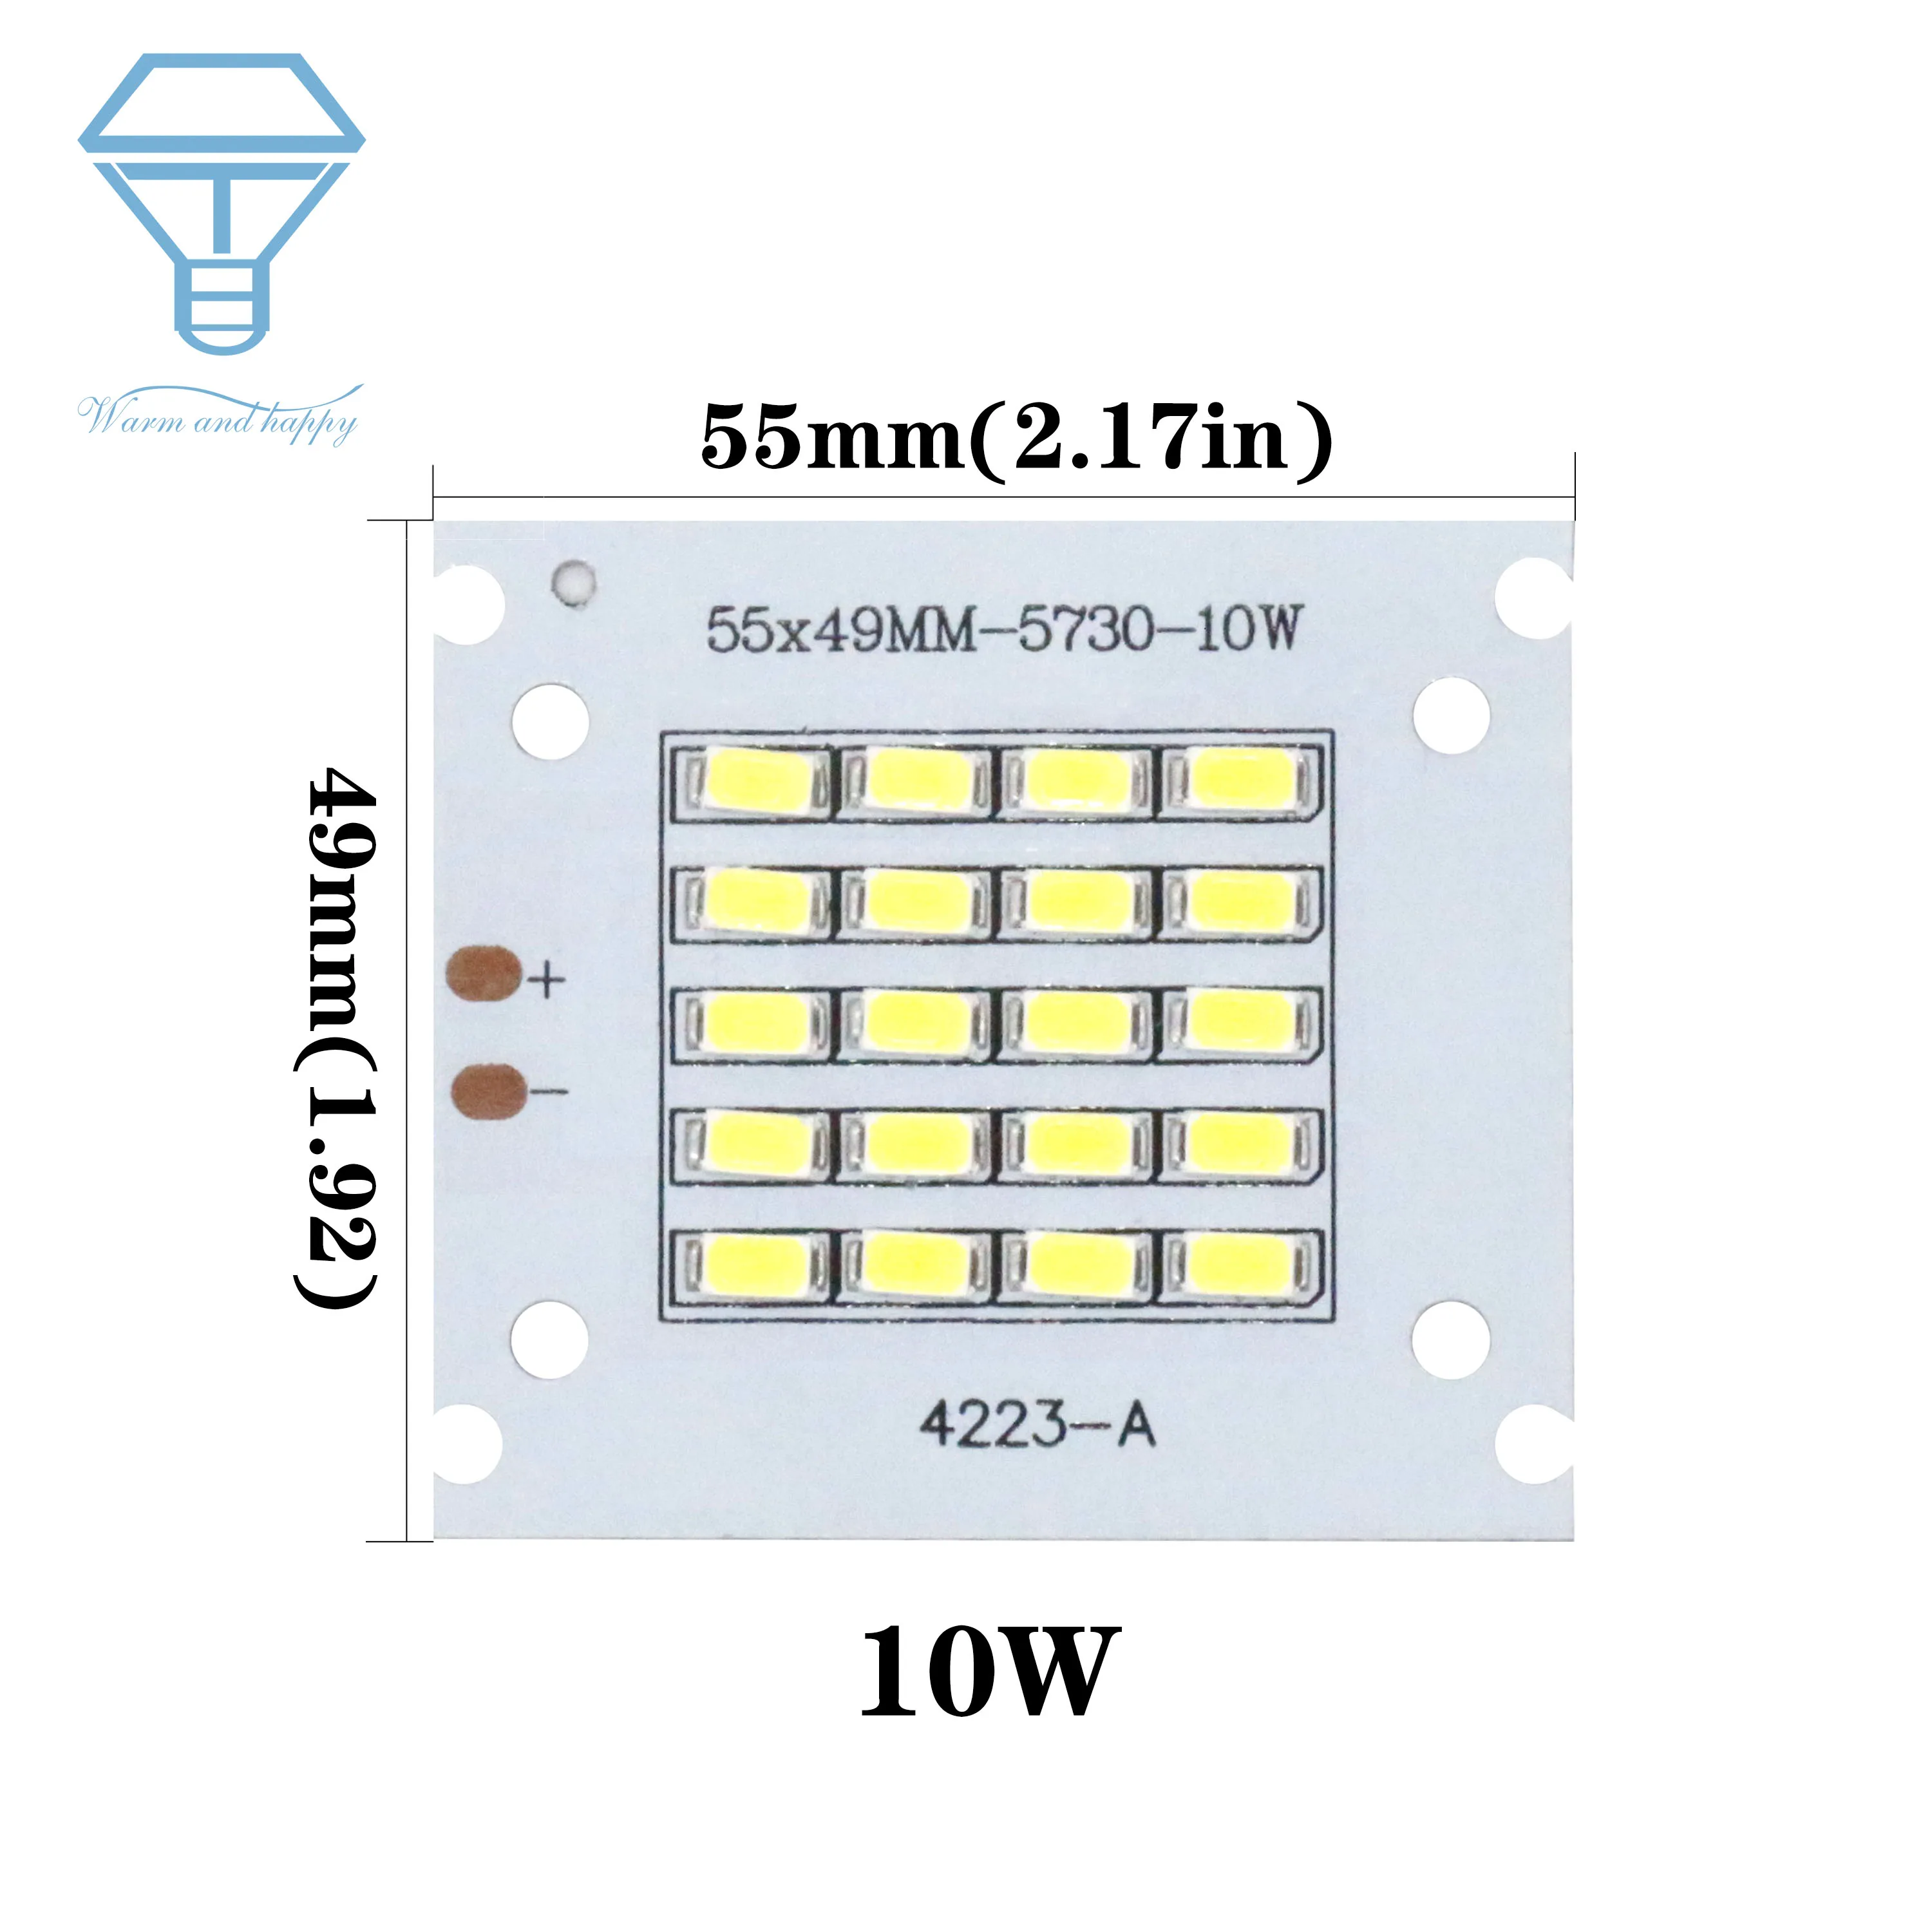 657E High Power 10W Constant Current LED Light Chip Lamp Efficient Driver Supply 